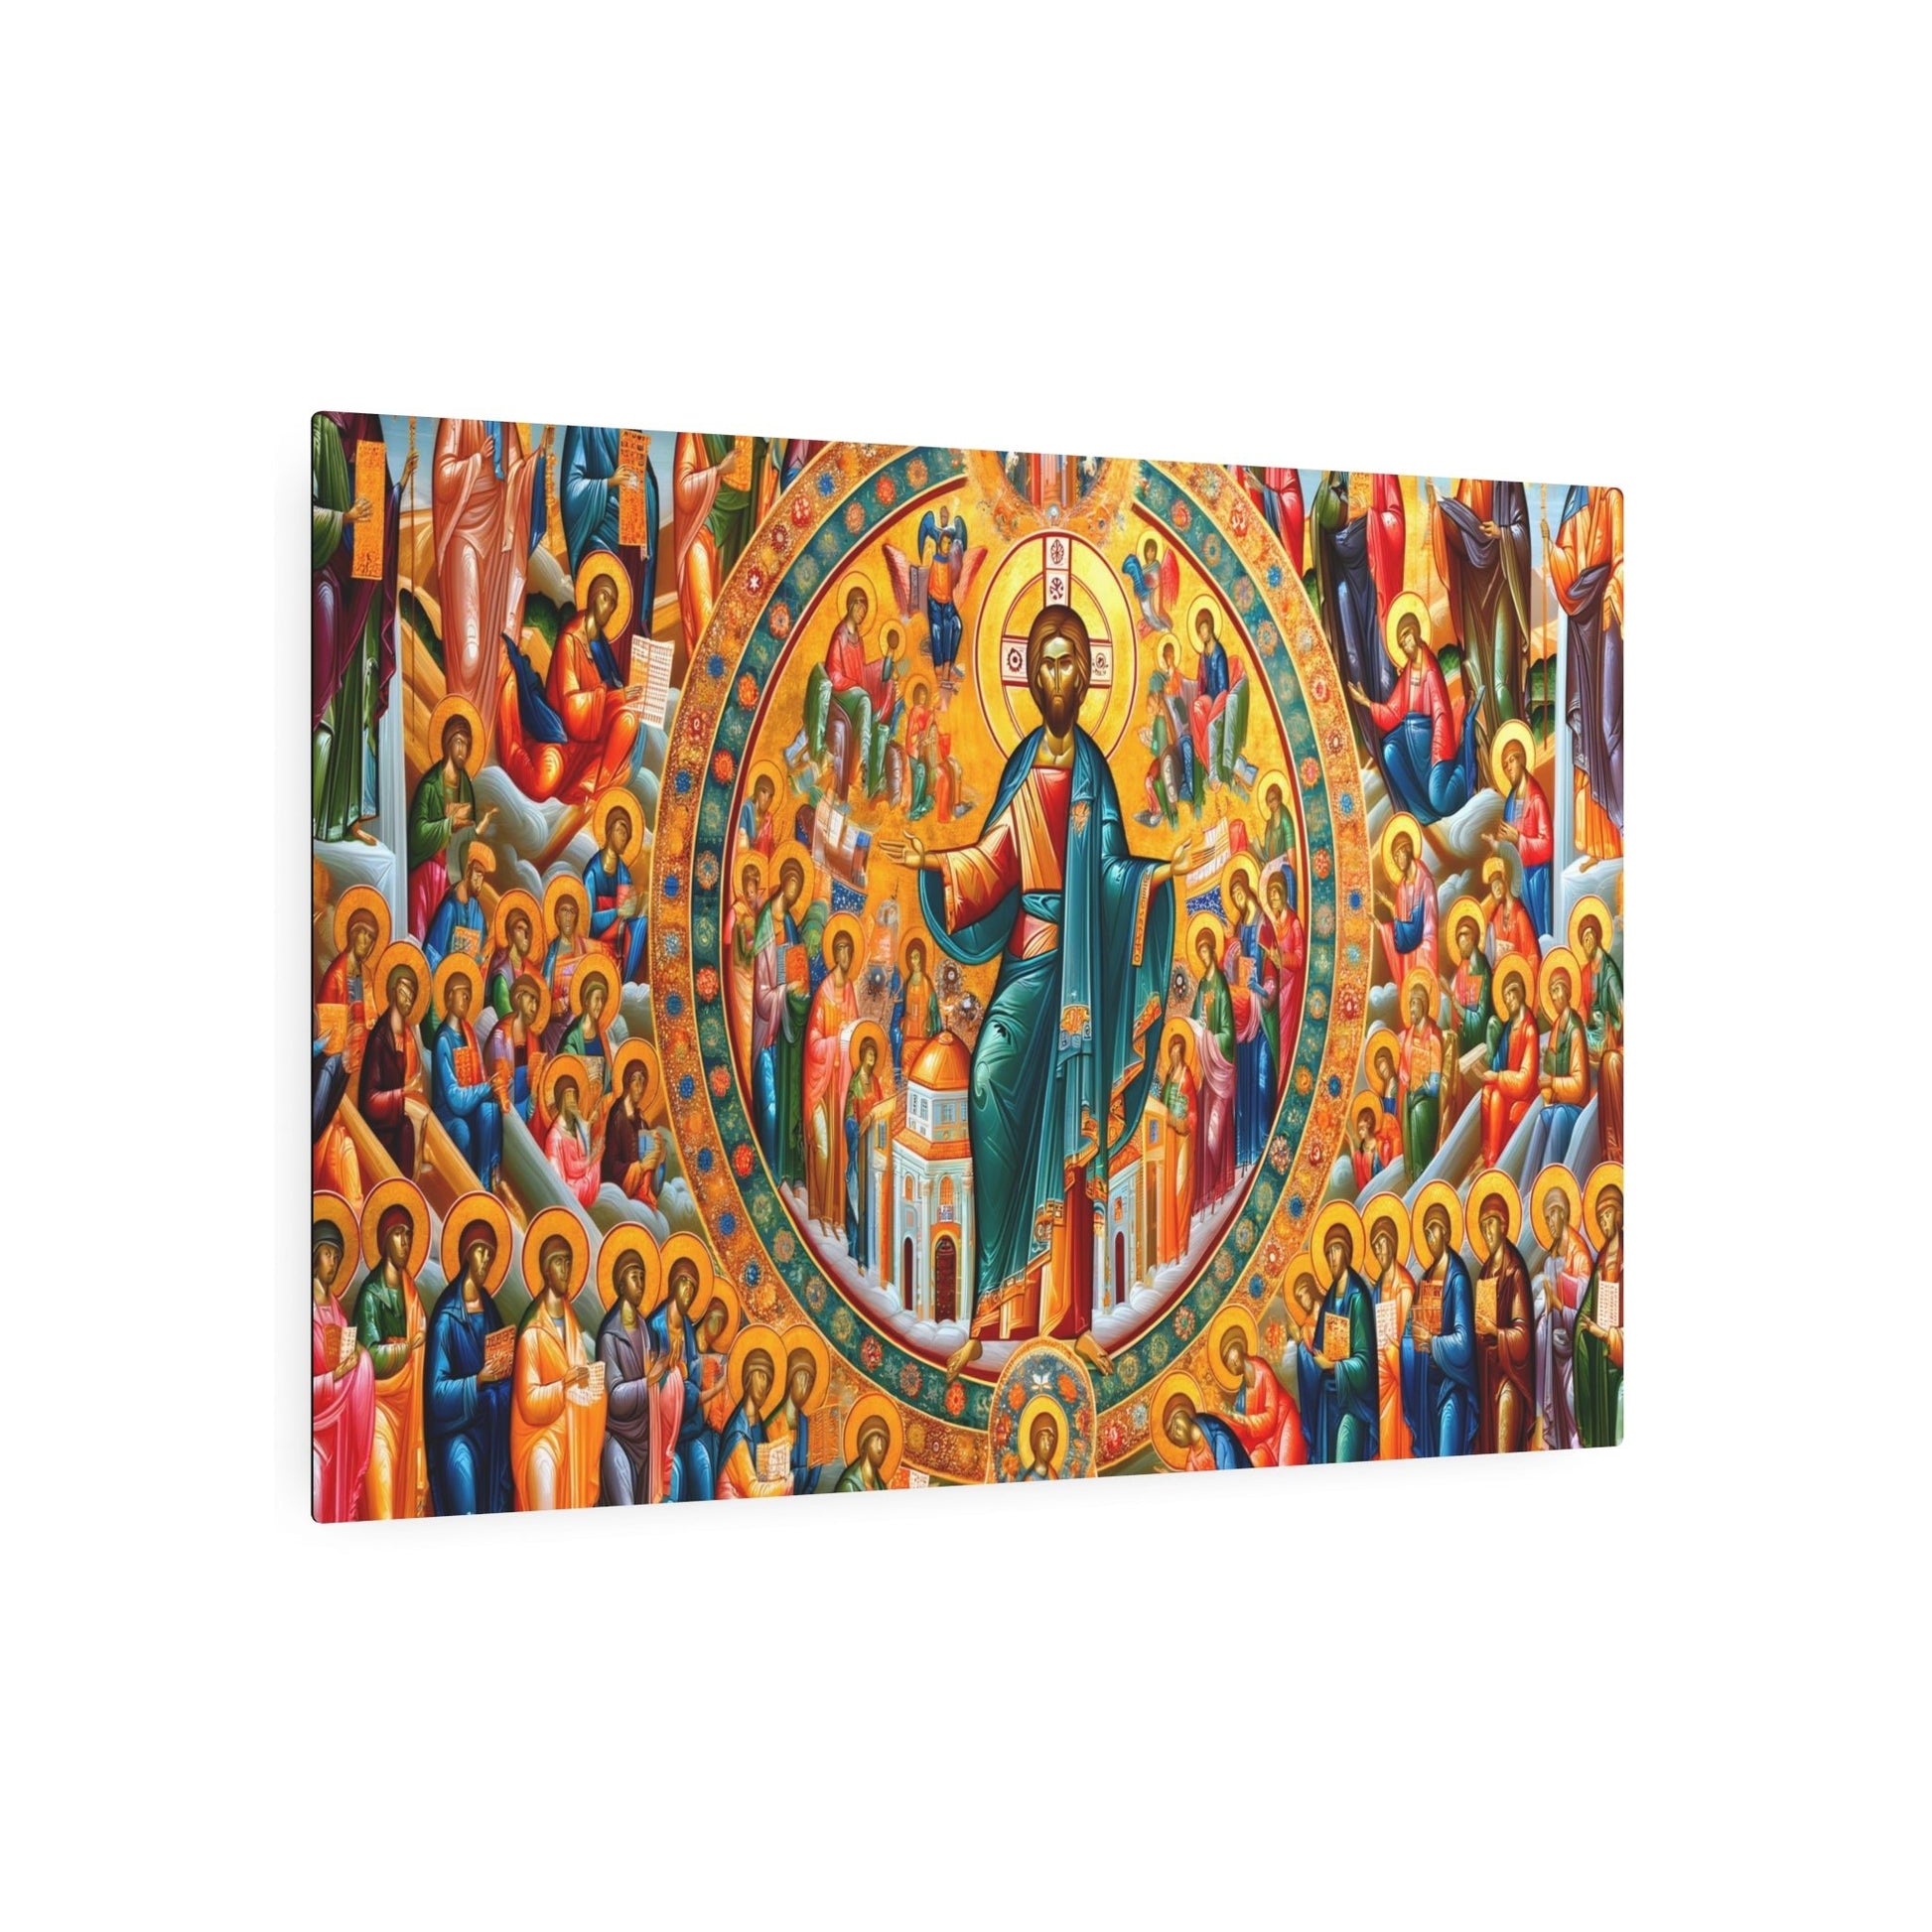 "Byzantine Style Art Piece: Gold Accented Rich Colors and Flat Figures in Religious Themes" - Metal Poster Art 36″ x 24″ (Horizontal) 0.12''